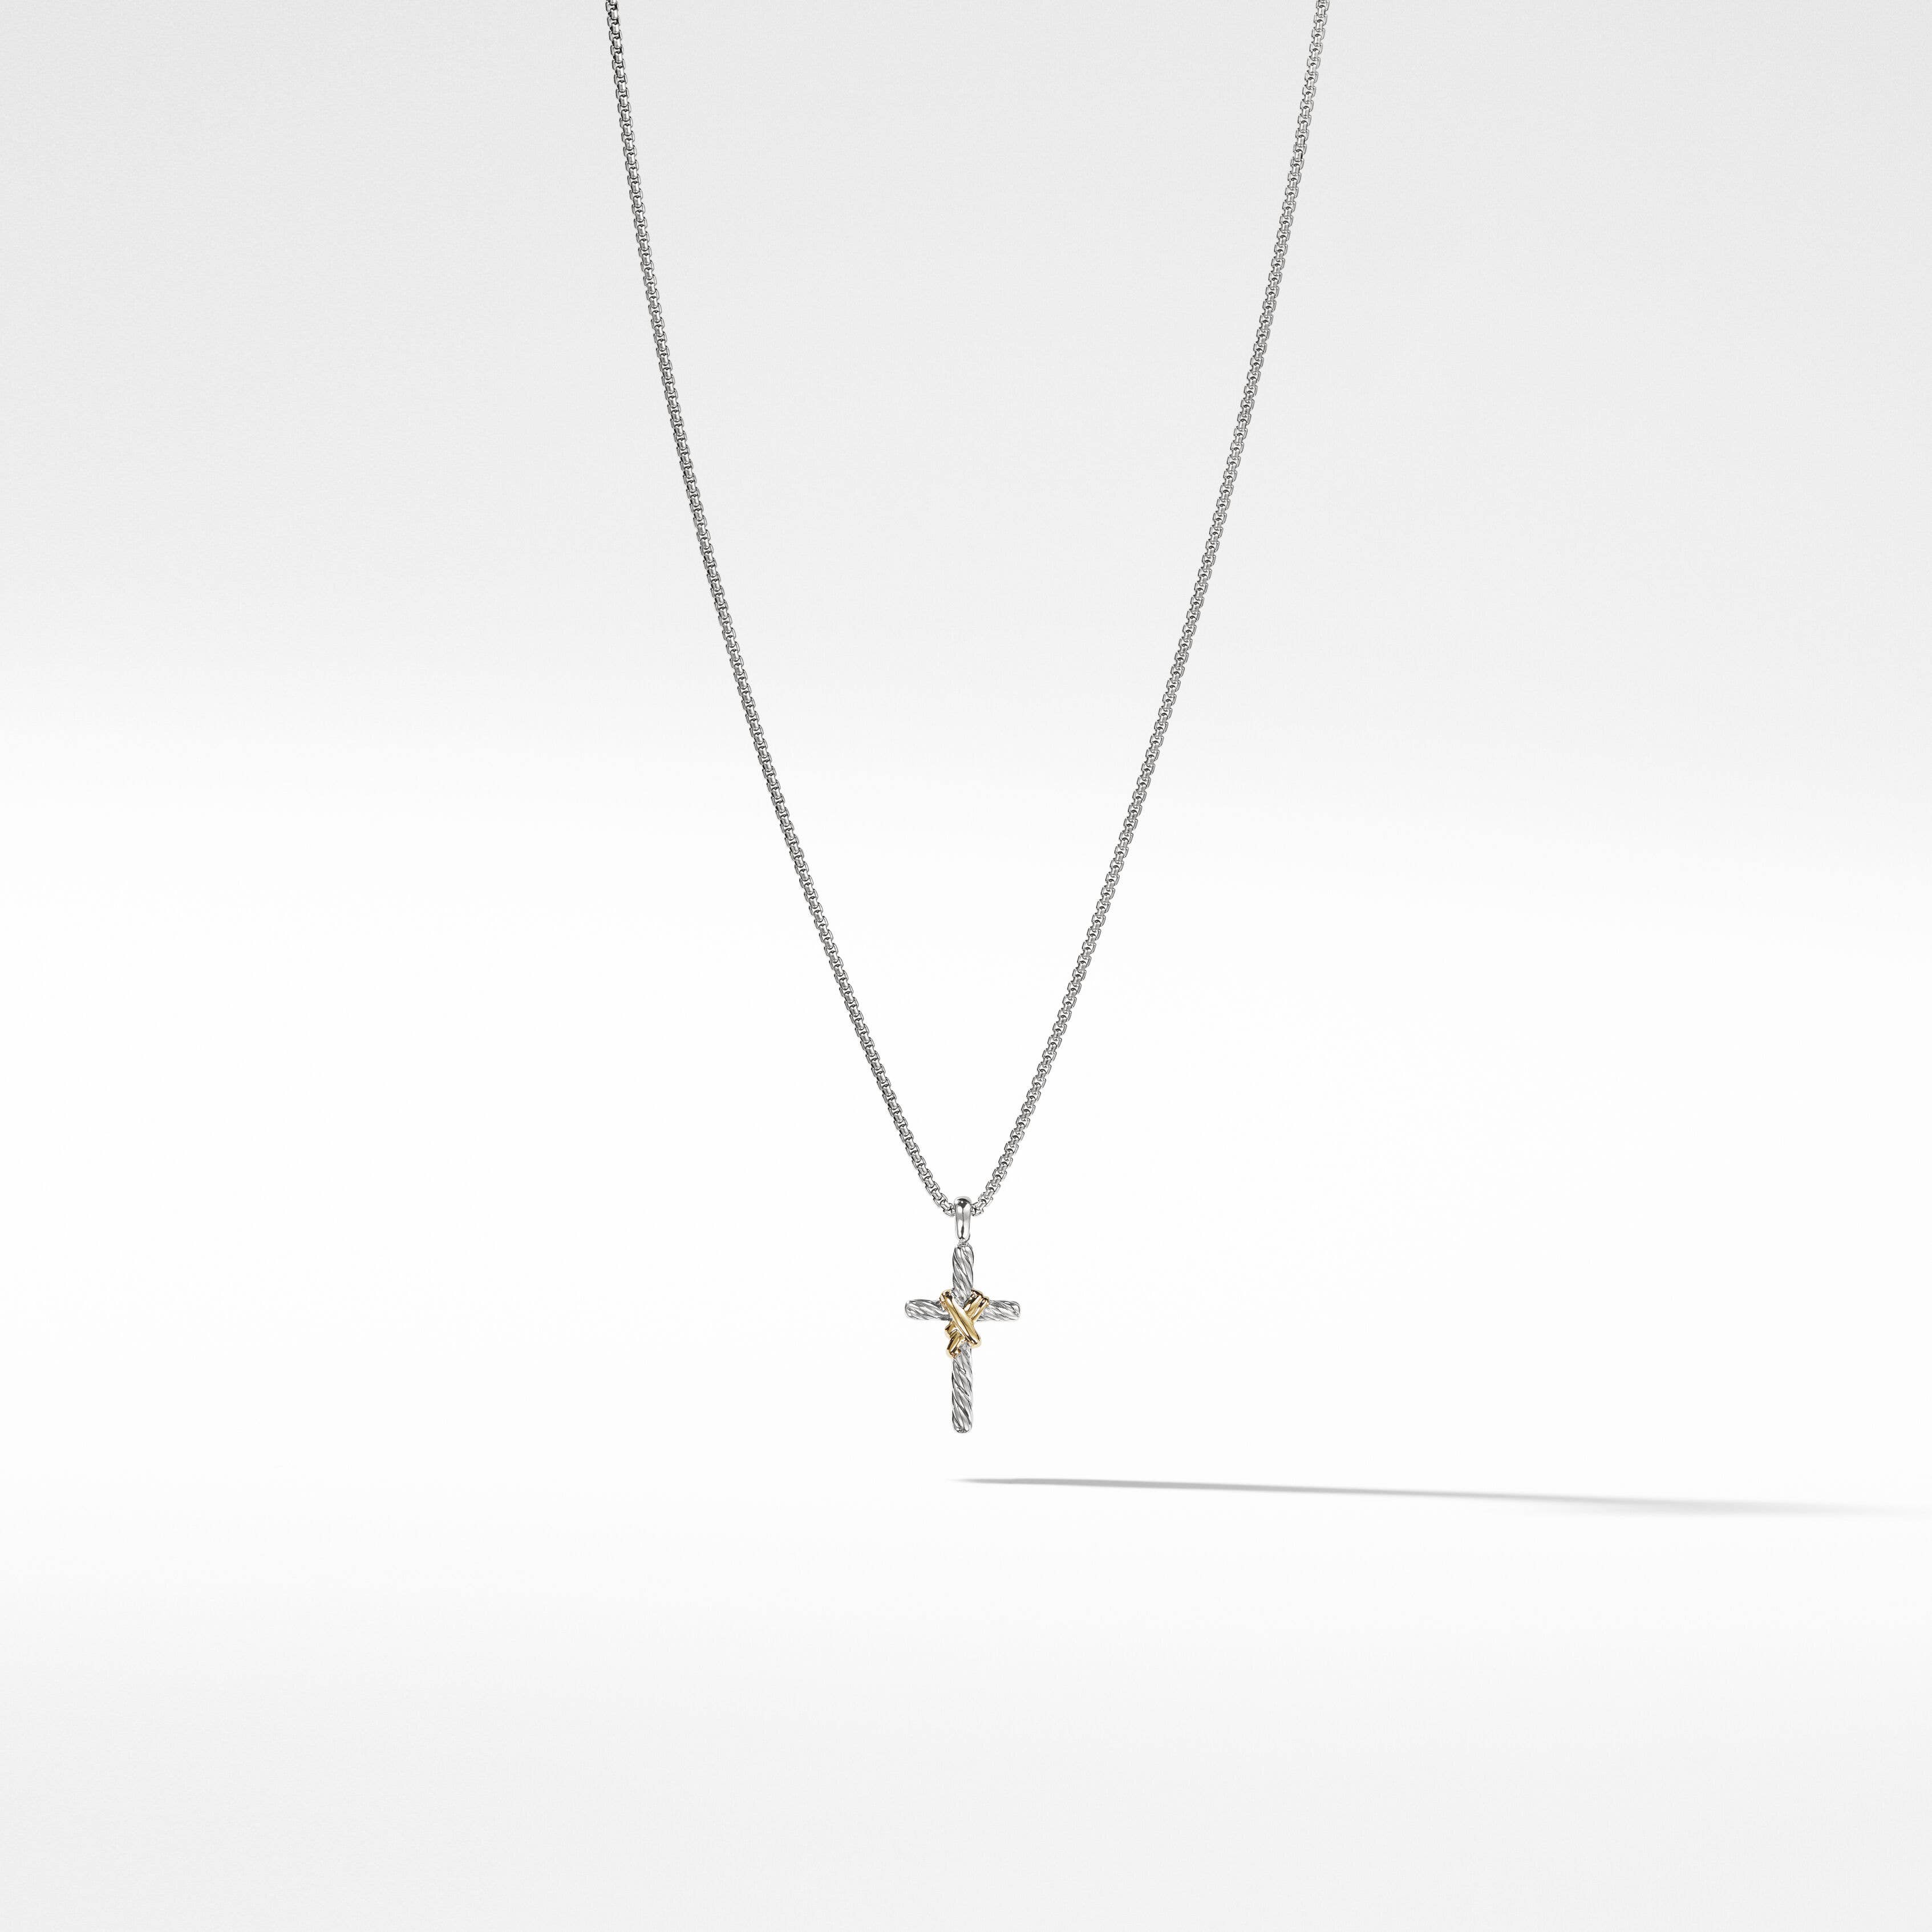 X Cross Necklace in Sterling Silver with 14K Yellow Gold